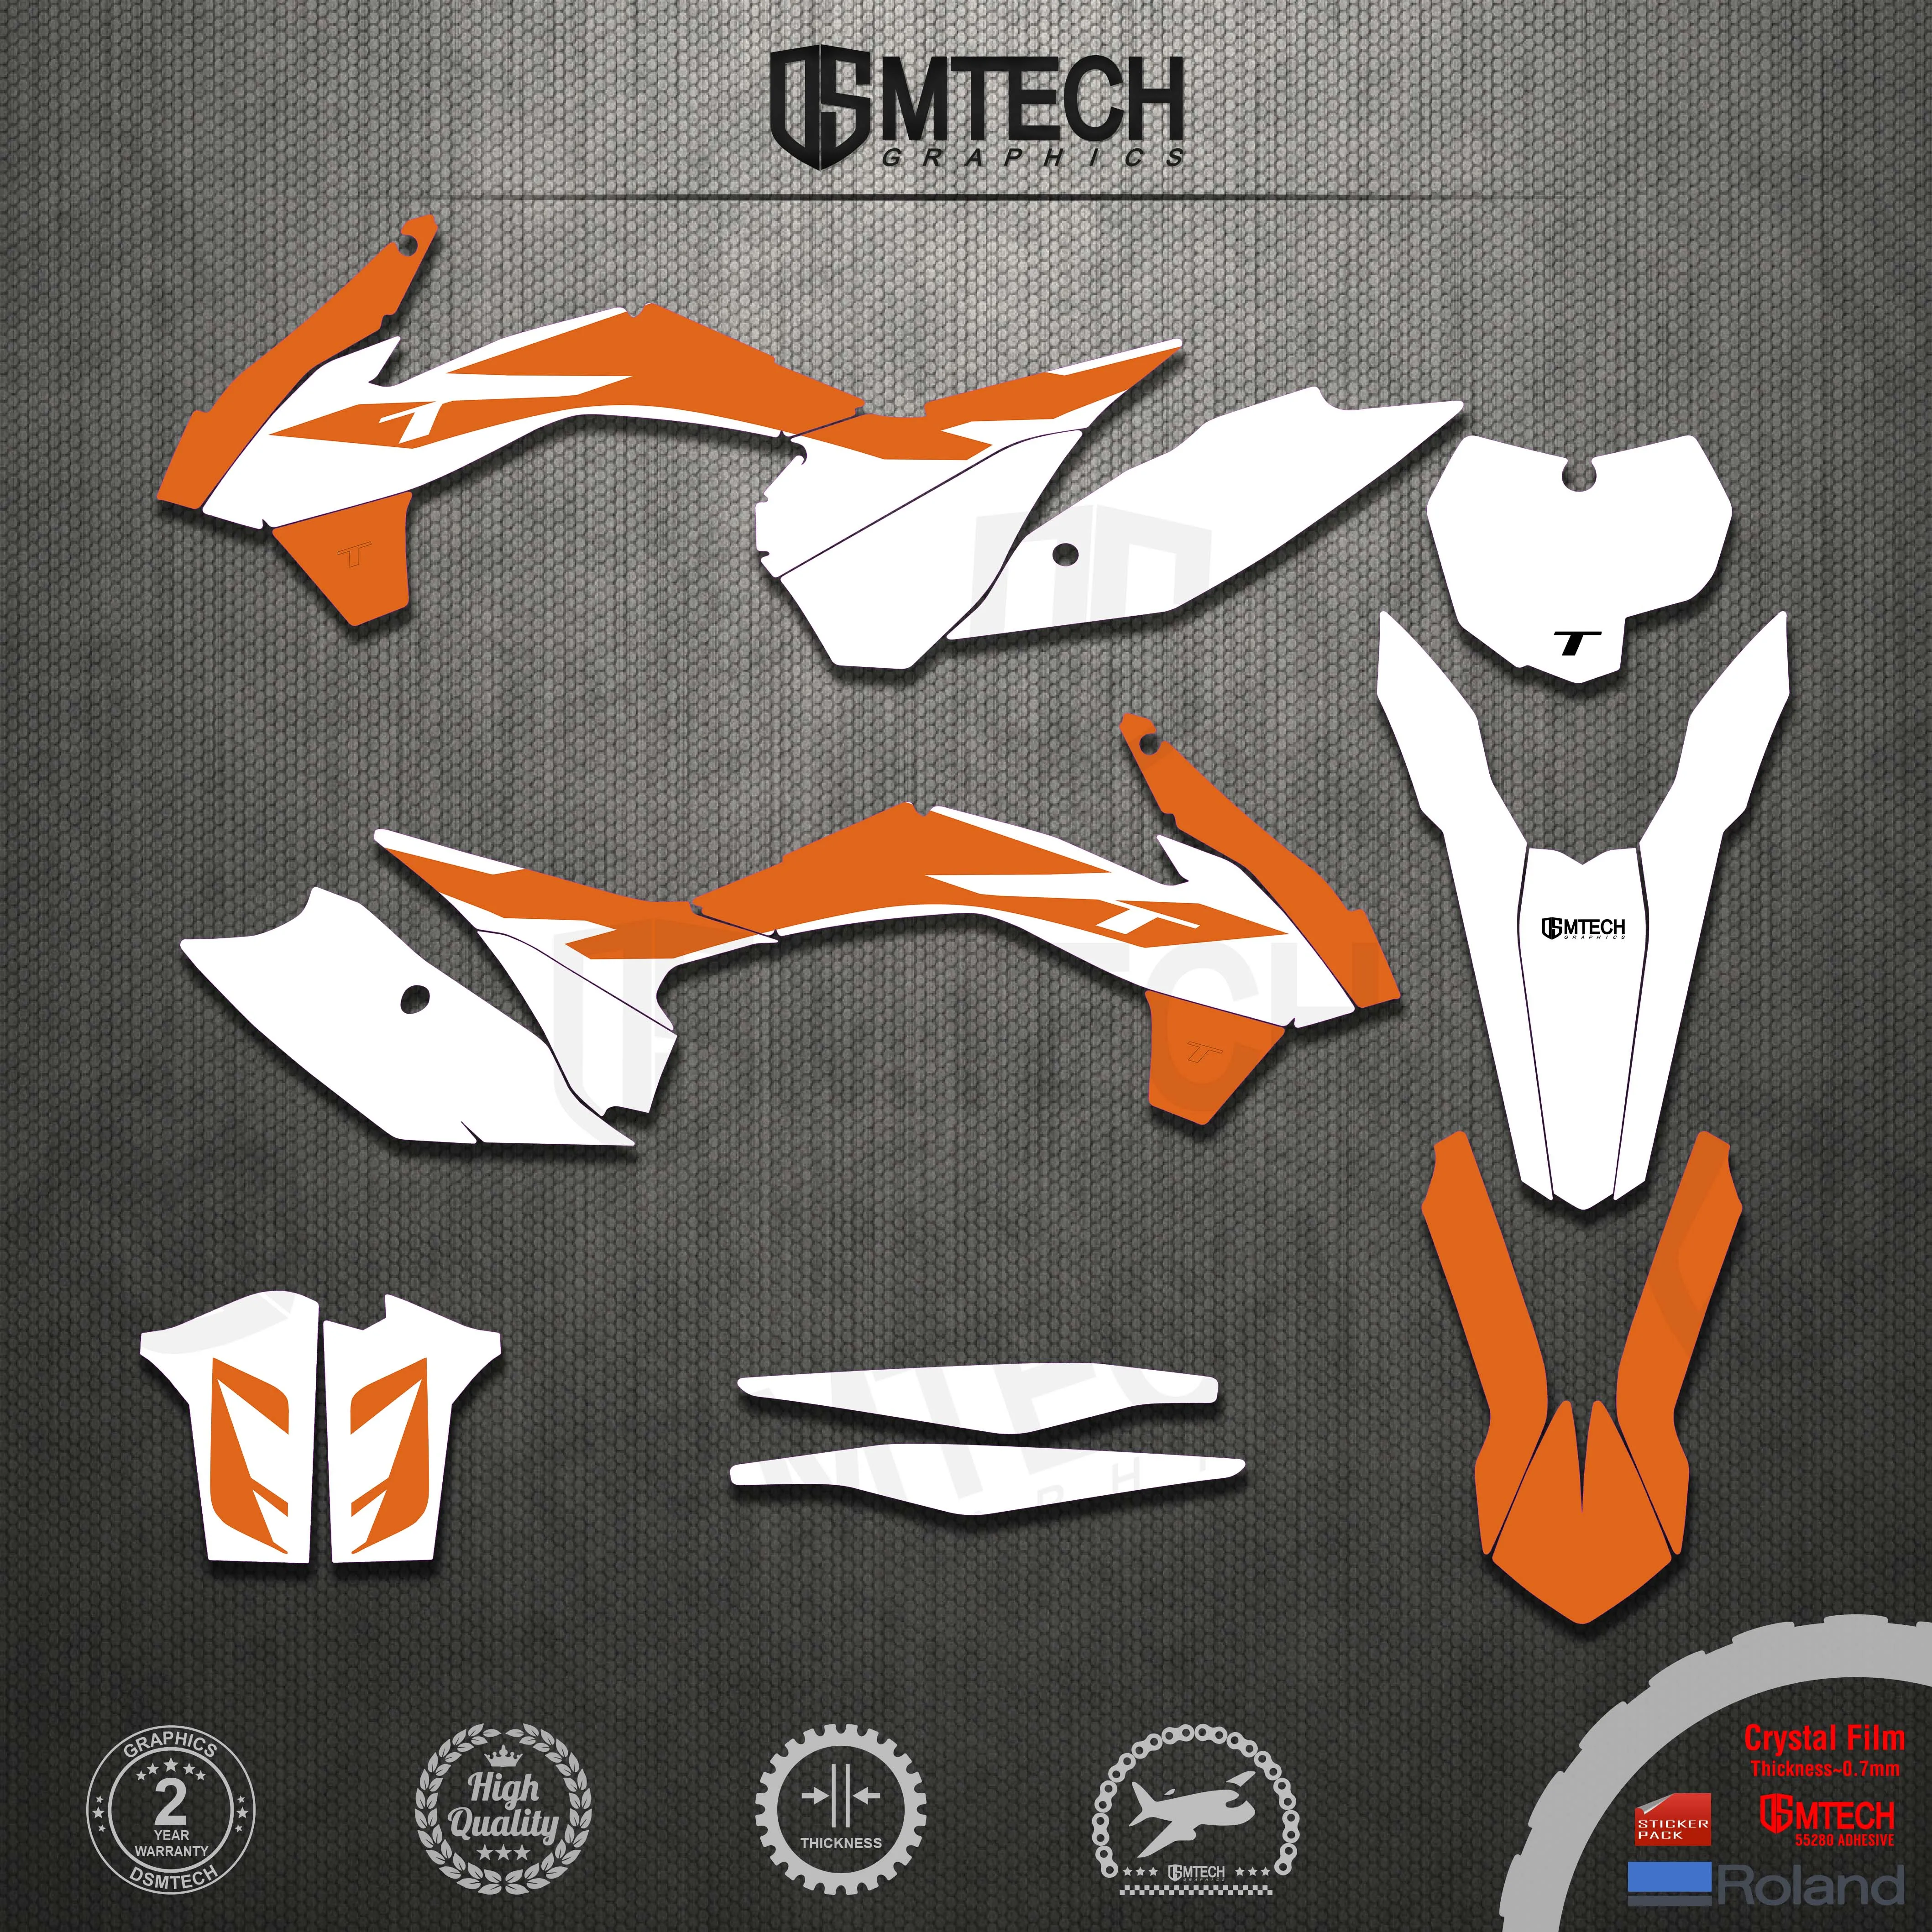 DSMTECH Custom Team Graphics Decal Sticker Kit Combo for KTM 2013 2014 2015 SX SXF , 2014 2015 2016 EXC XC-W EXC-F 003